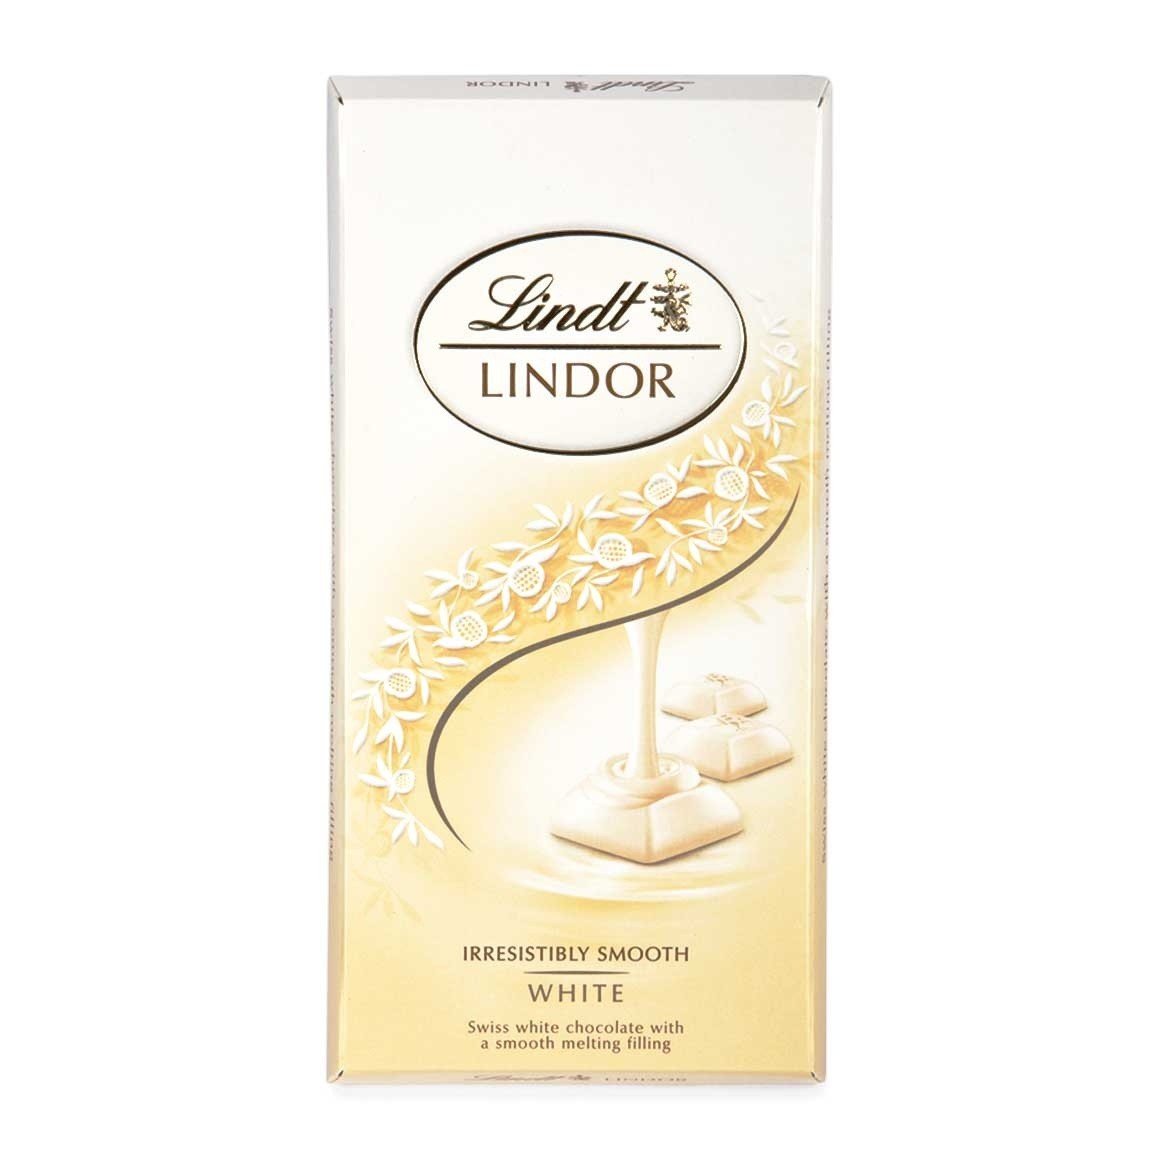 Lindt Lindor Combo Of 2 Irresistibly Smooth Chocolates (White And Milk), 100 Grams Each